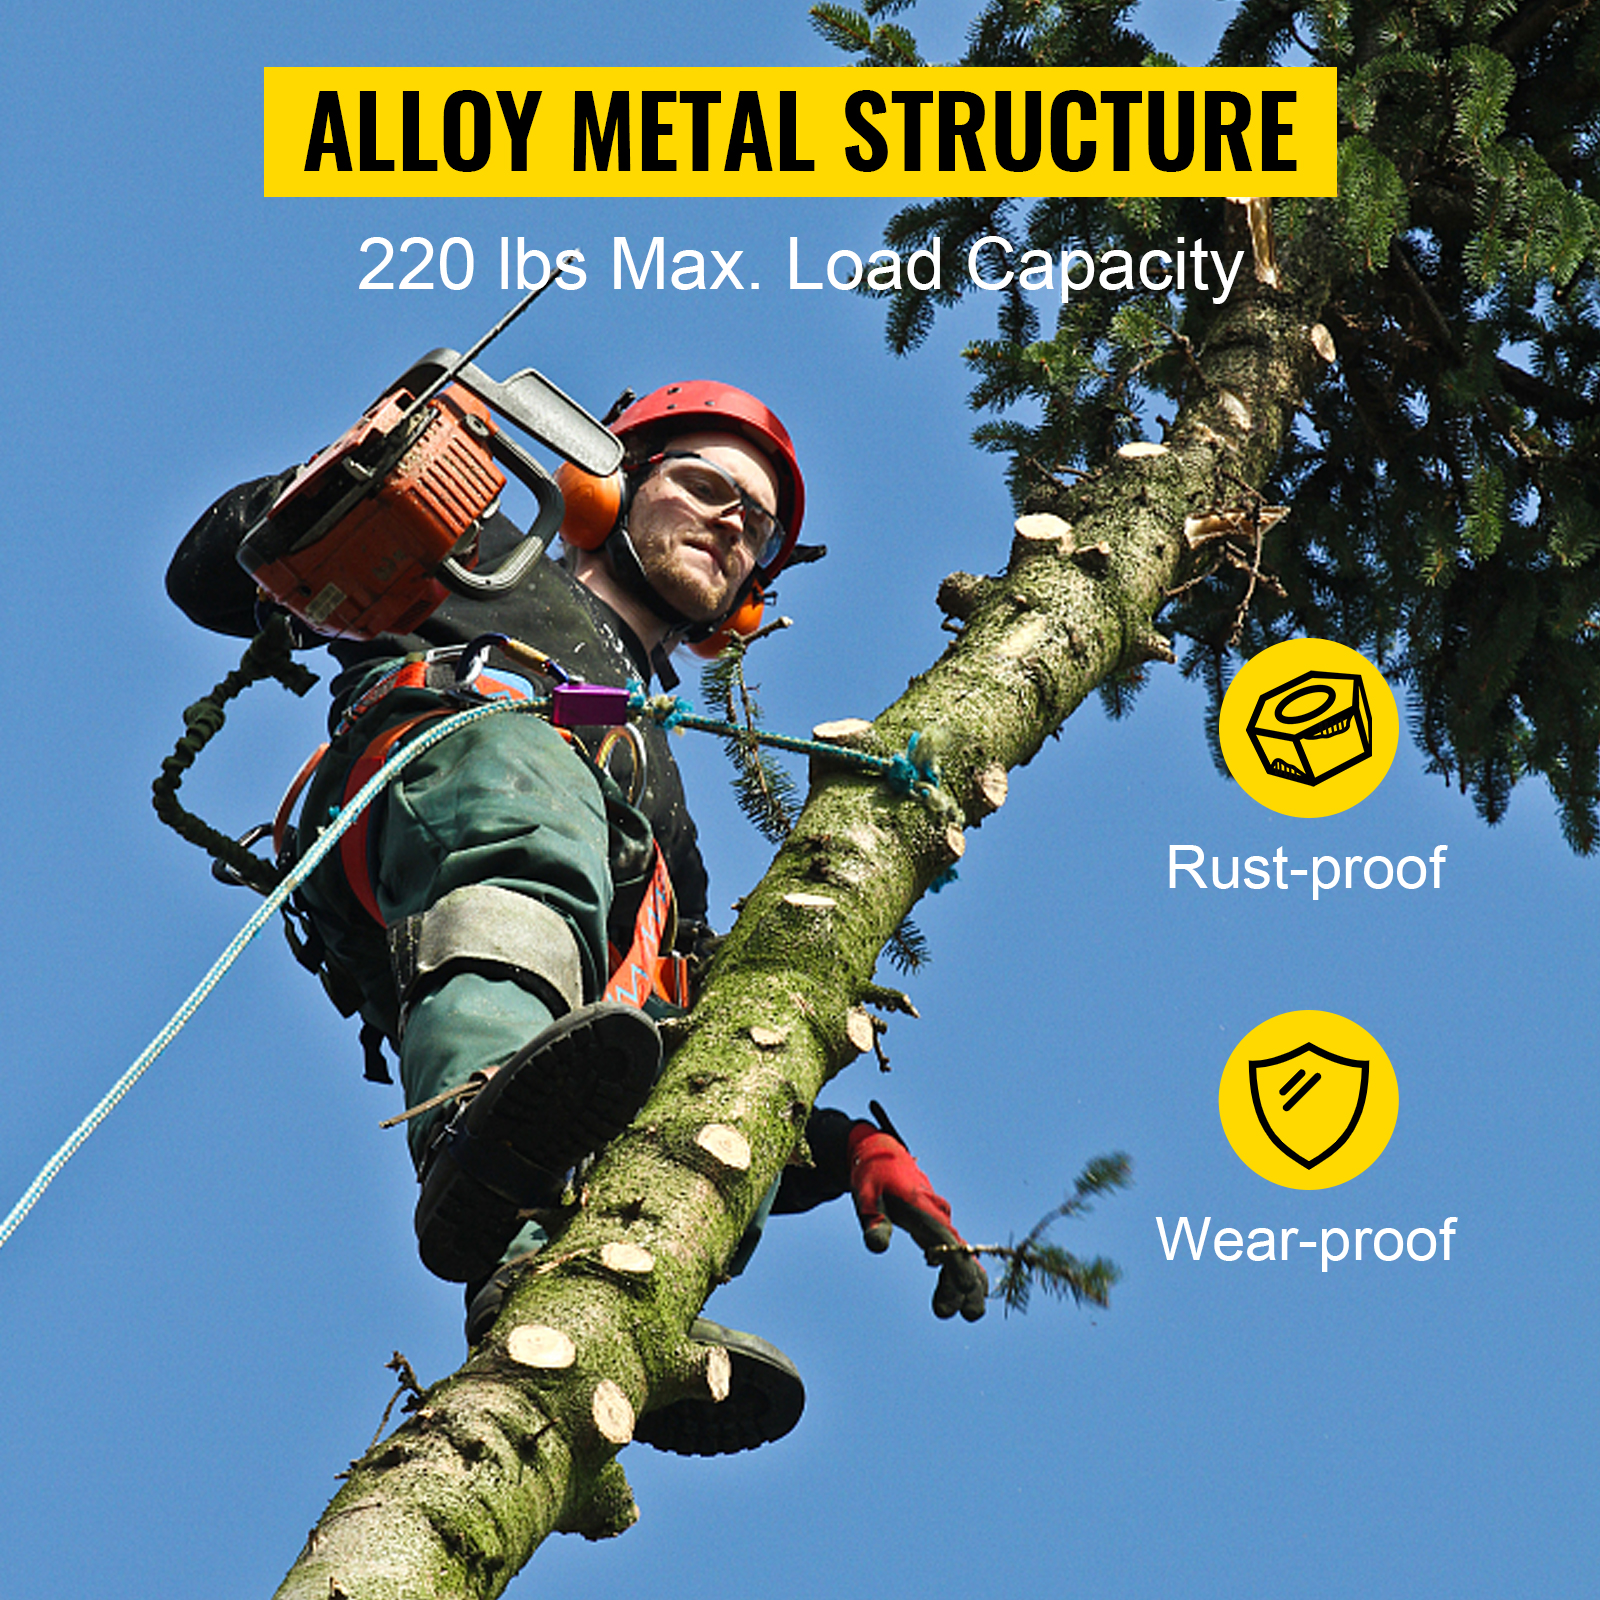 Treehog TH1000 Steel Spikes: Reliable Tree Climbing Gear